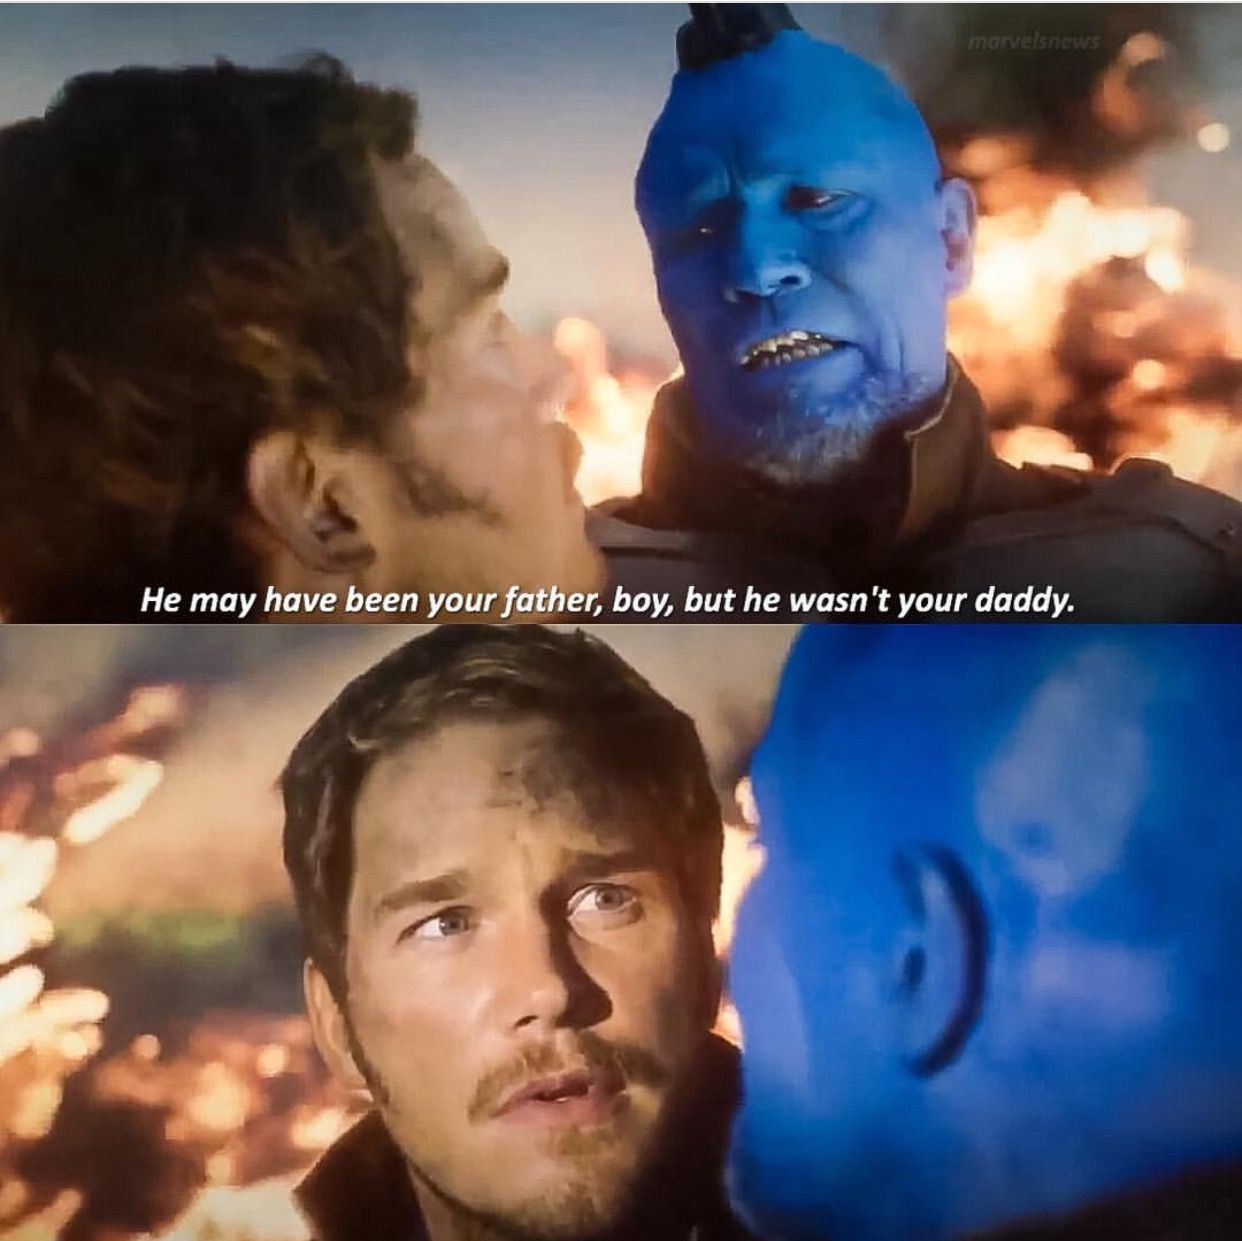 Ifeanyi Sur Twitter In Guardians Of The Galaxy 2 Peter Quill Aka Starlord Has To Kill His Father Ego A Celestial Who Intends To Take Over Earth As Ego S Planet Crumbles